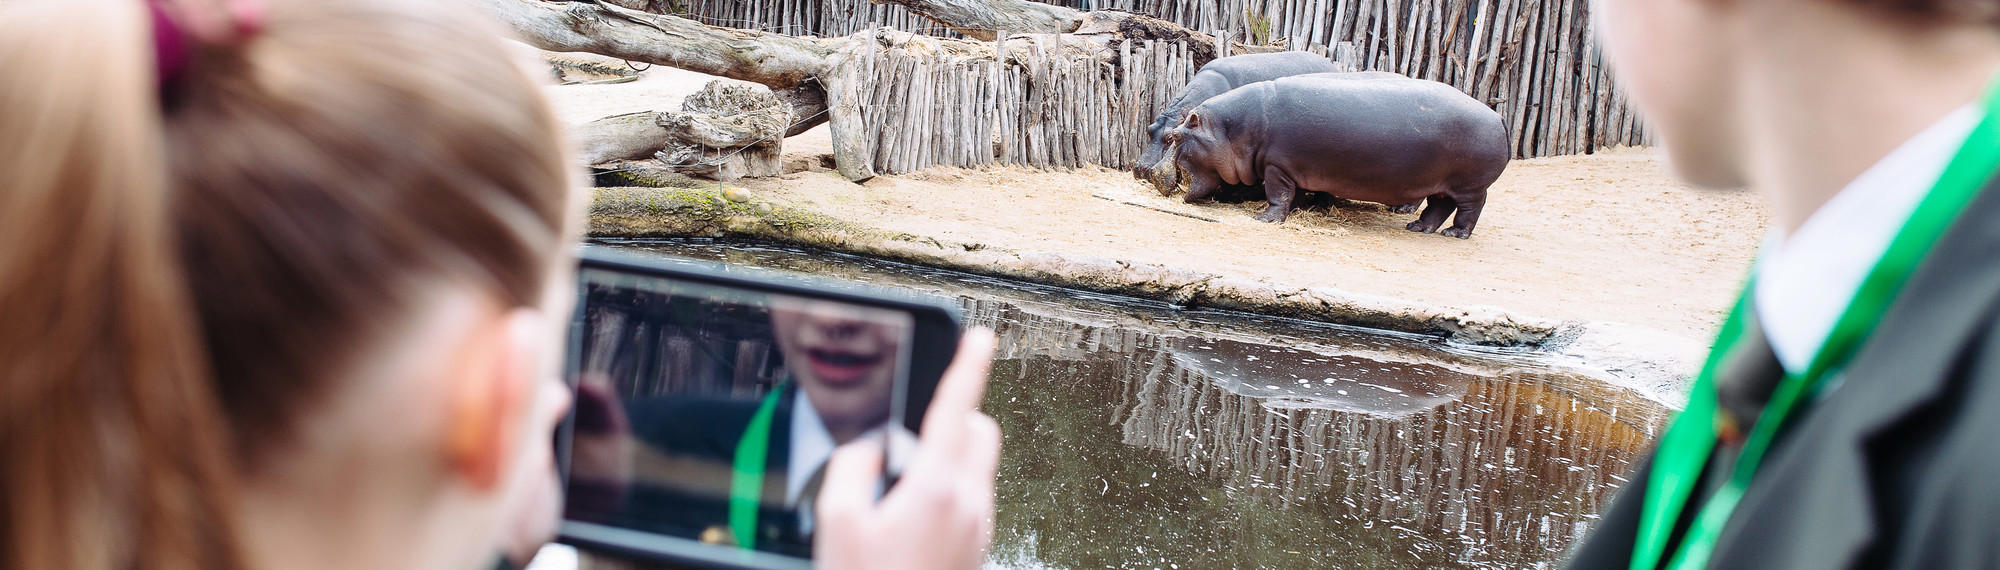 A view from behind of two school students looking at two hippos, one is taking a photo on a phone